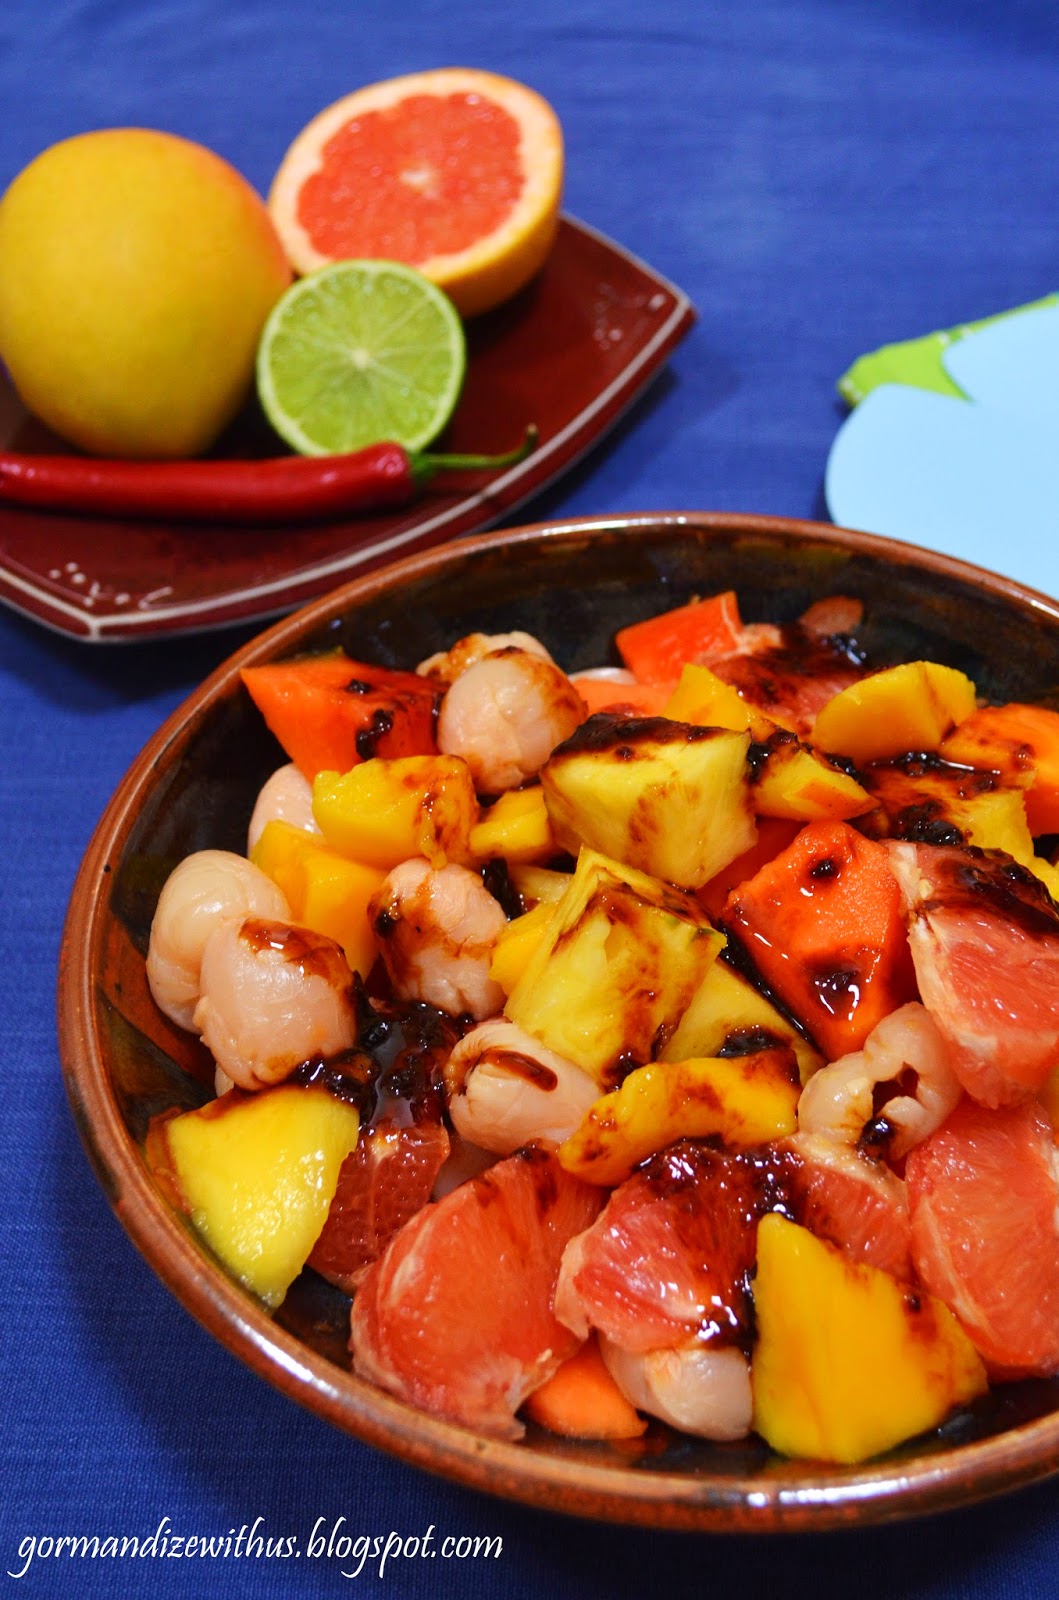 Photo Rujak Buah - Fruit Salad with Spicy Palm Sugar Sauce from Dumai City